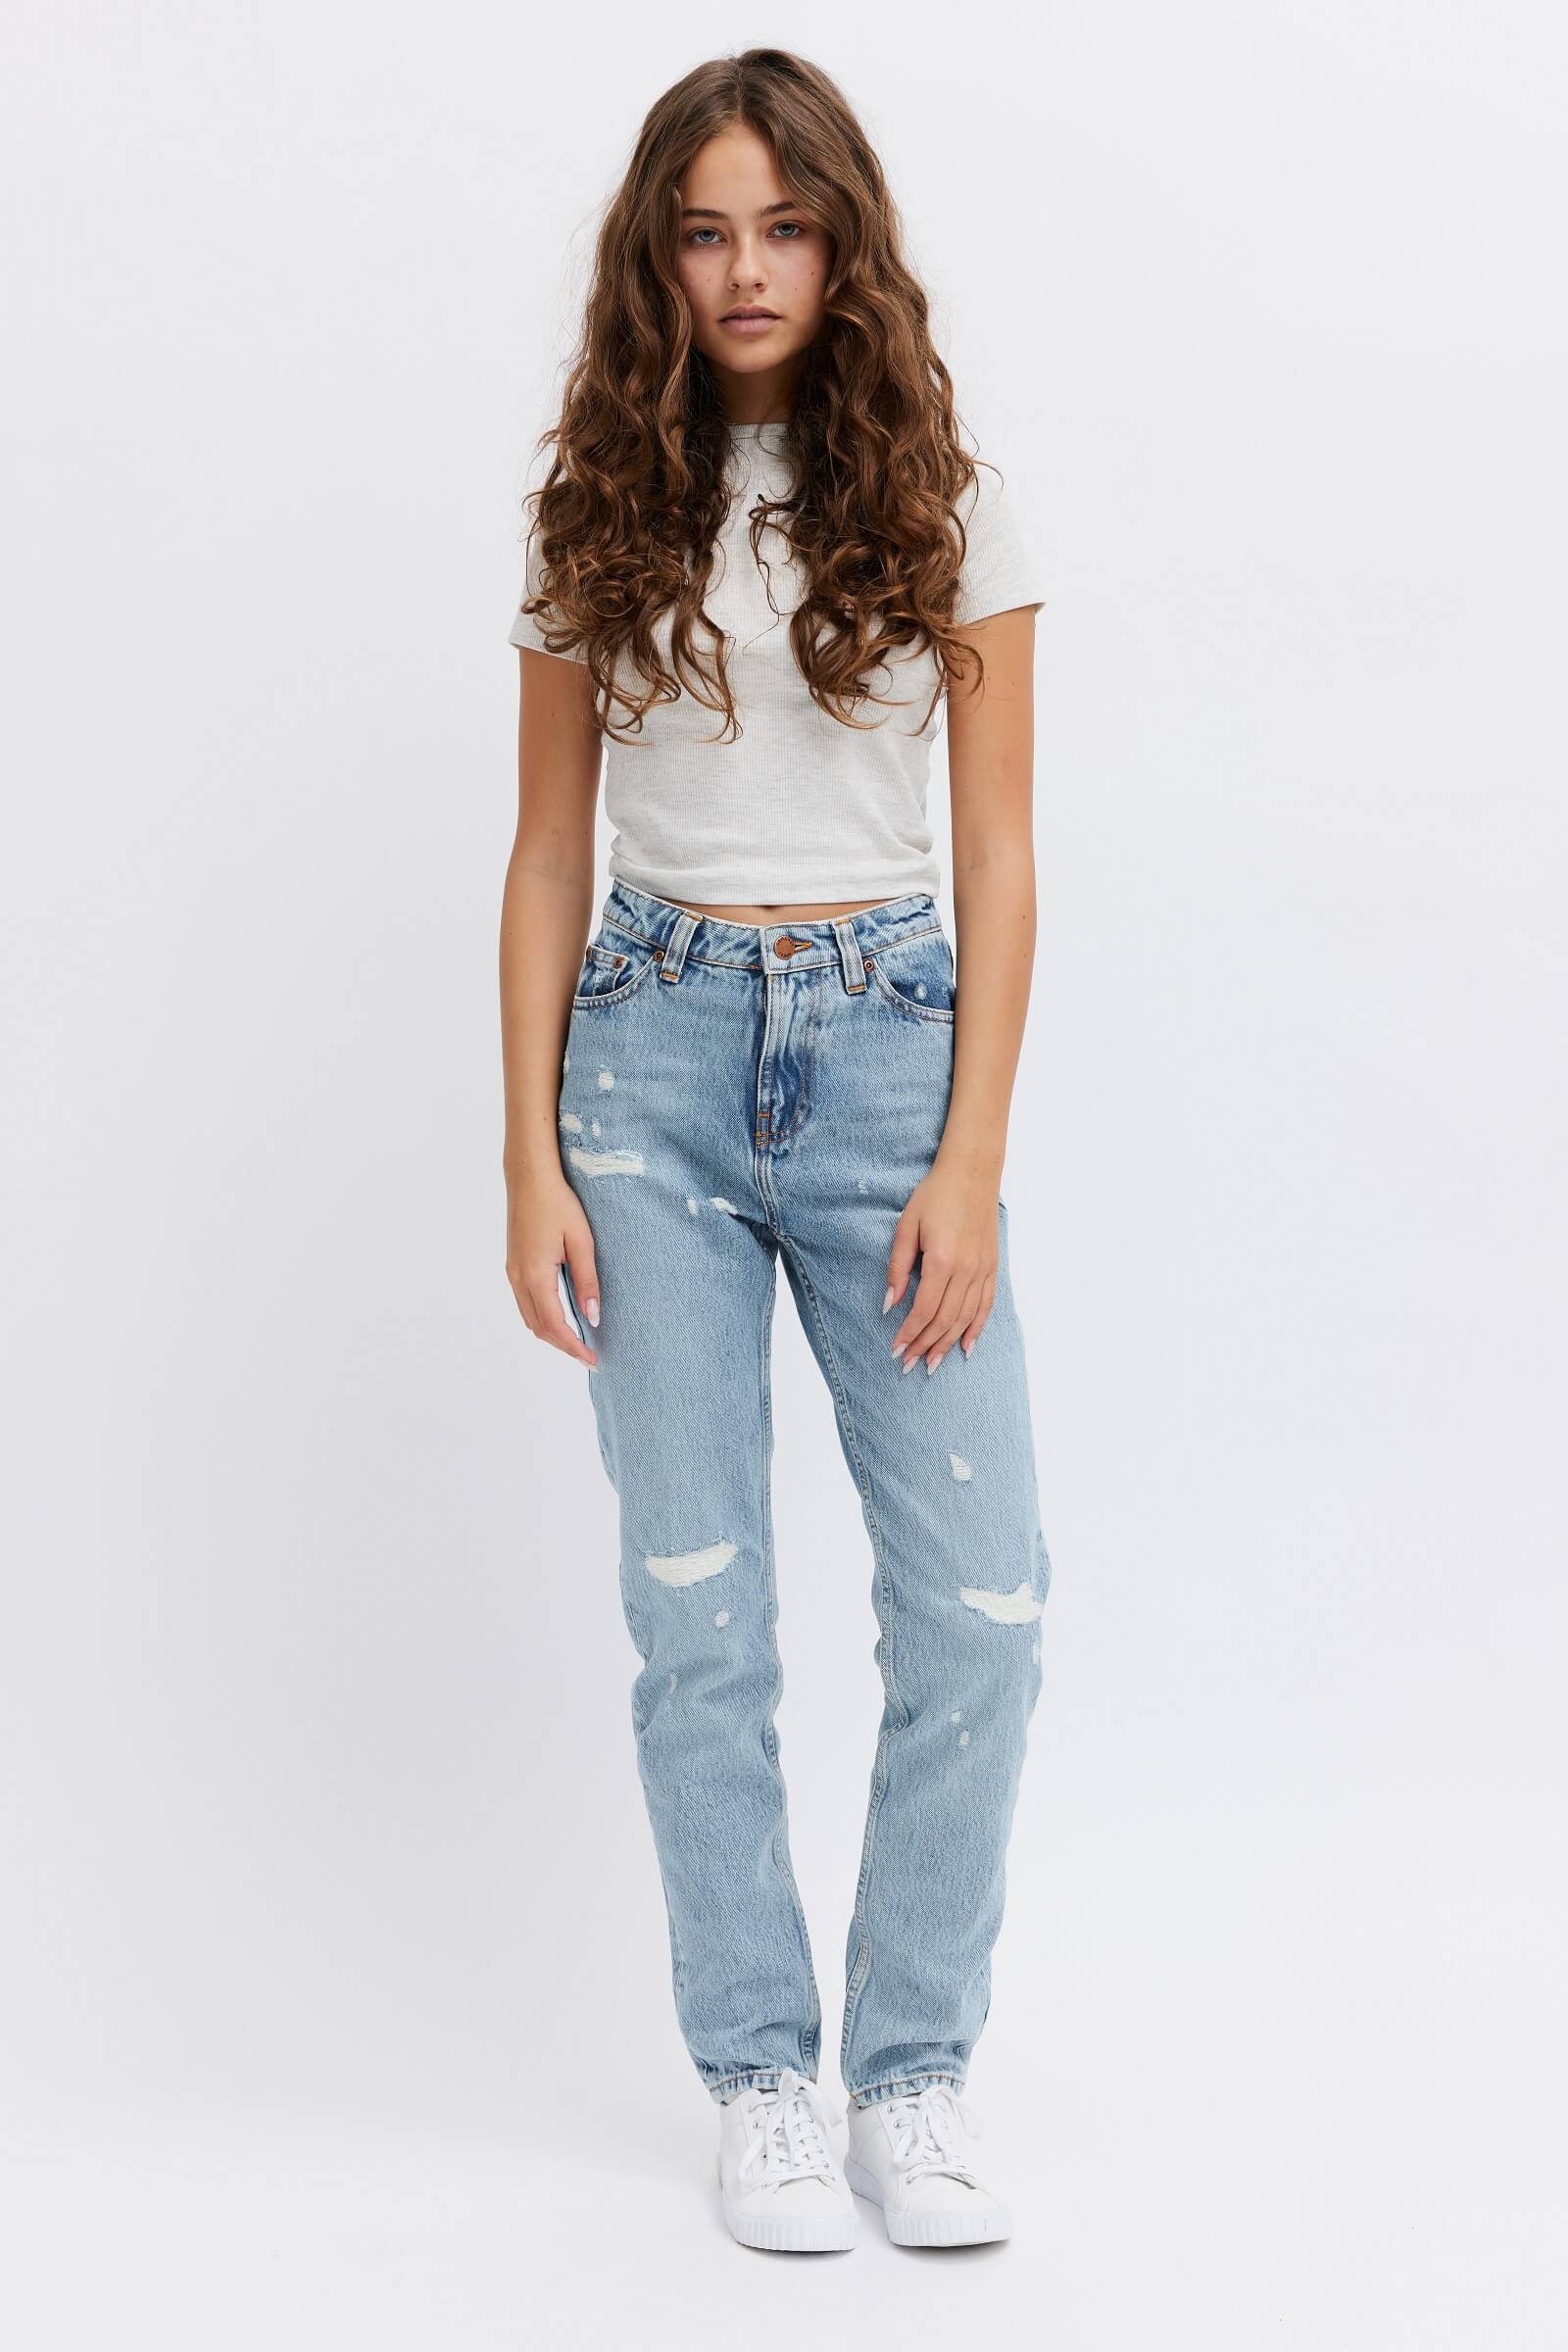 Ripped jeans for petite women